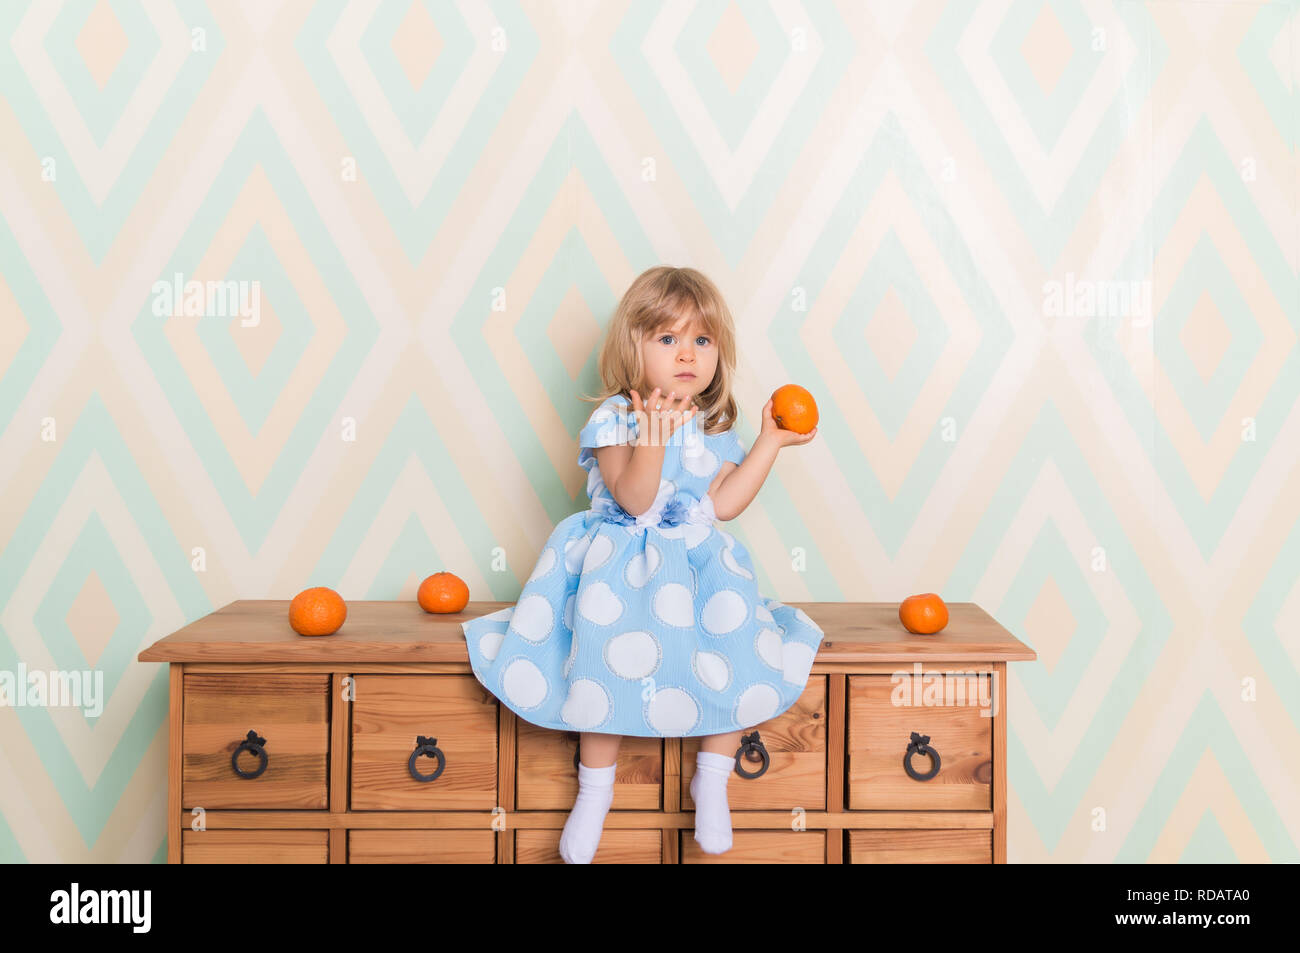 Toddler child baby girl in light blue dress sitting on the wooden chest of drawers seriously looking furrowing brows and holding fresh orange mandarins in left hand on rhomb wallpaper background Stock Photo